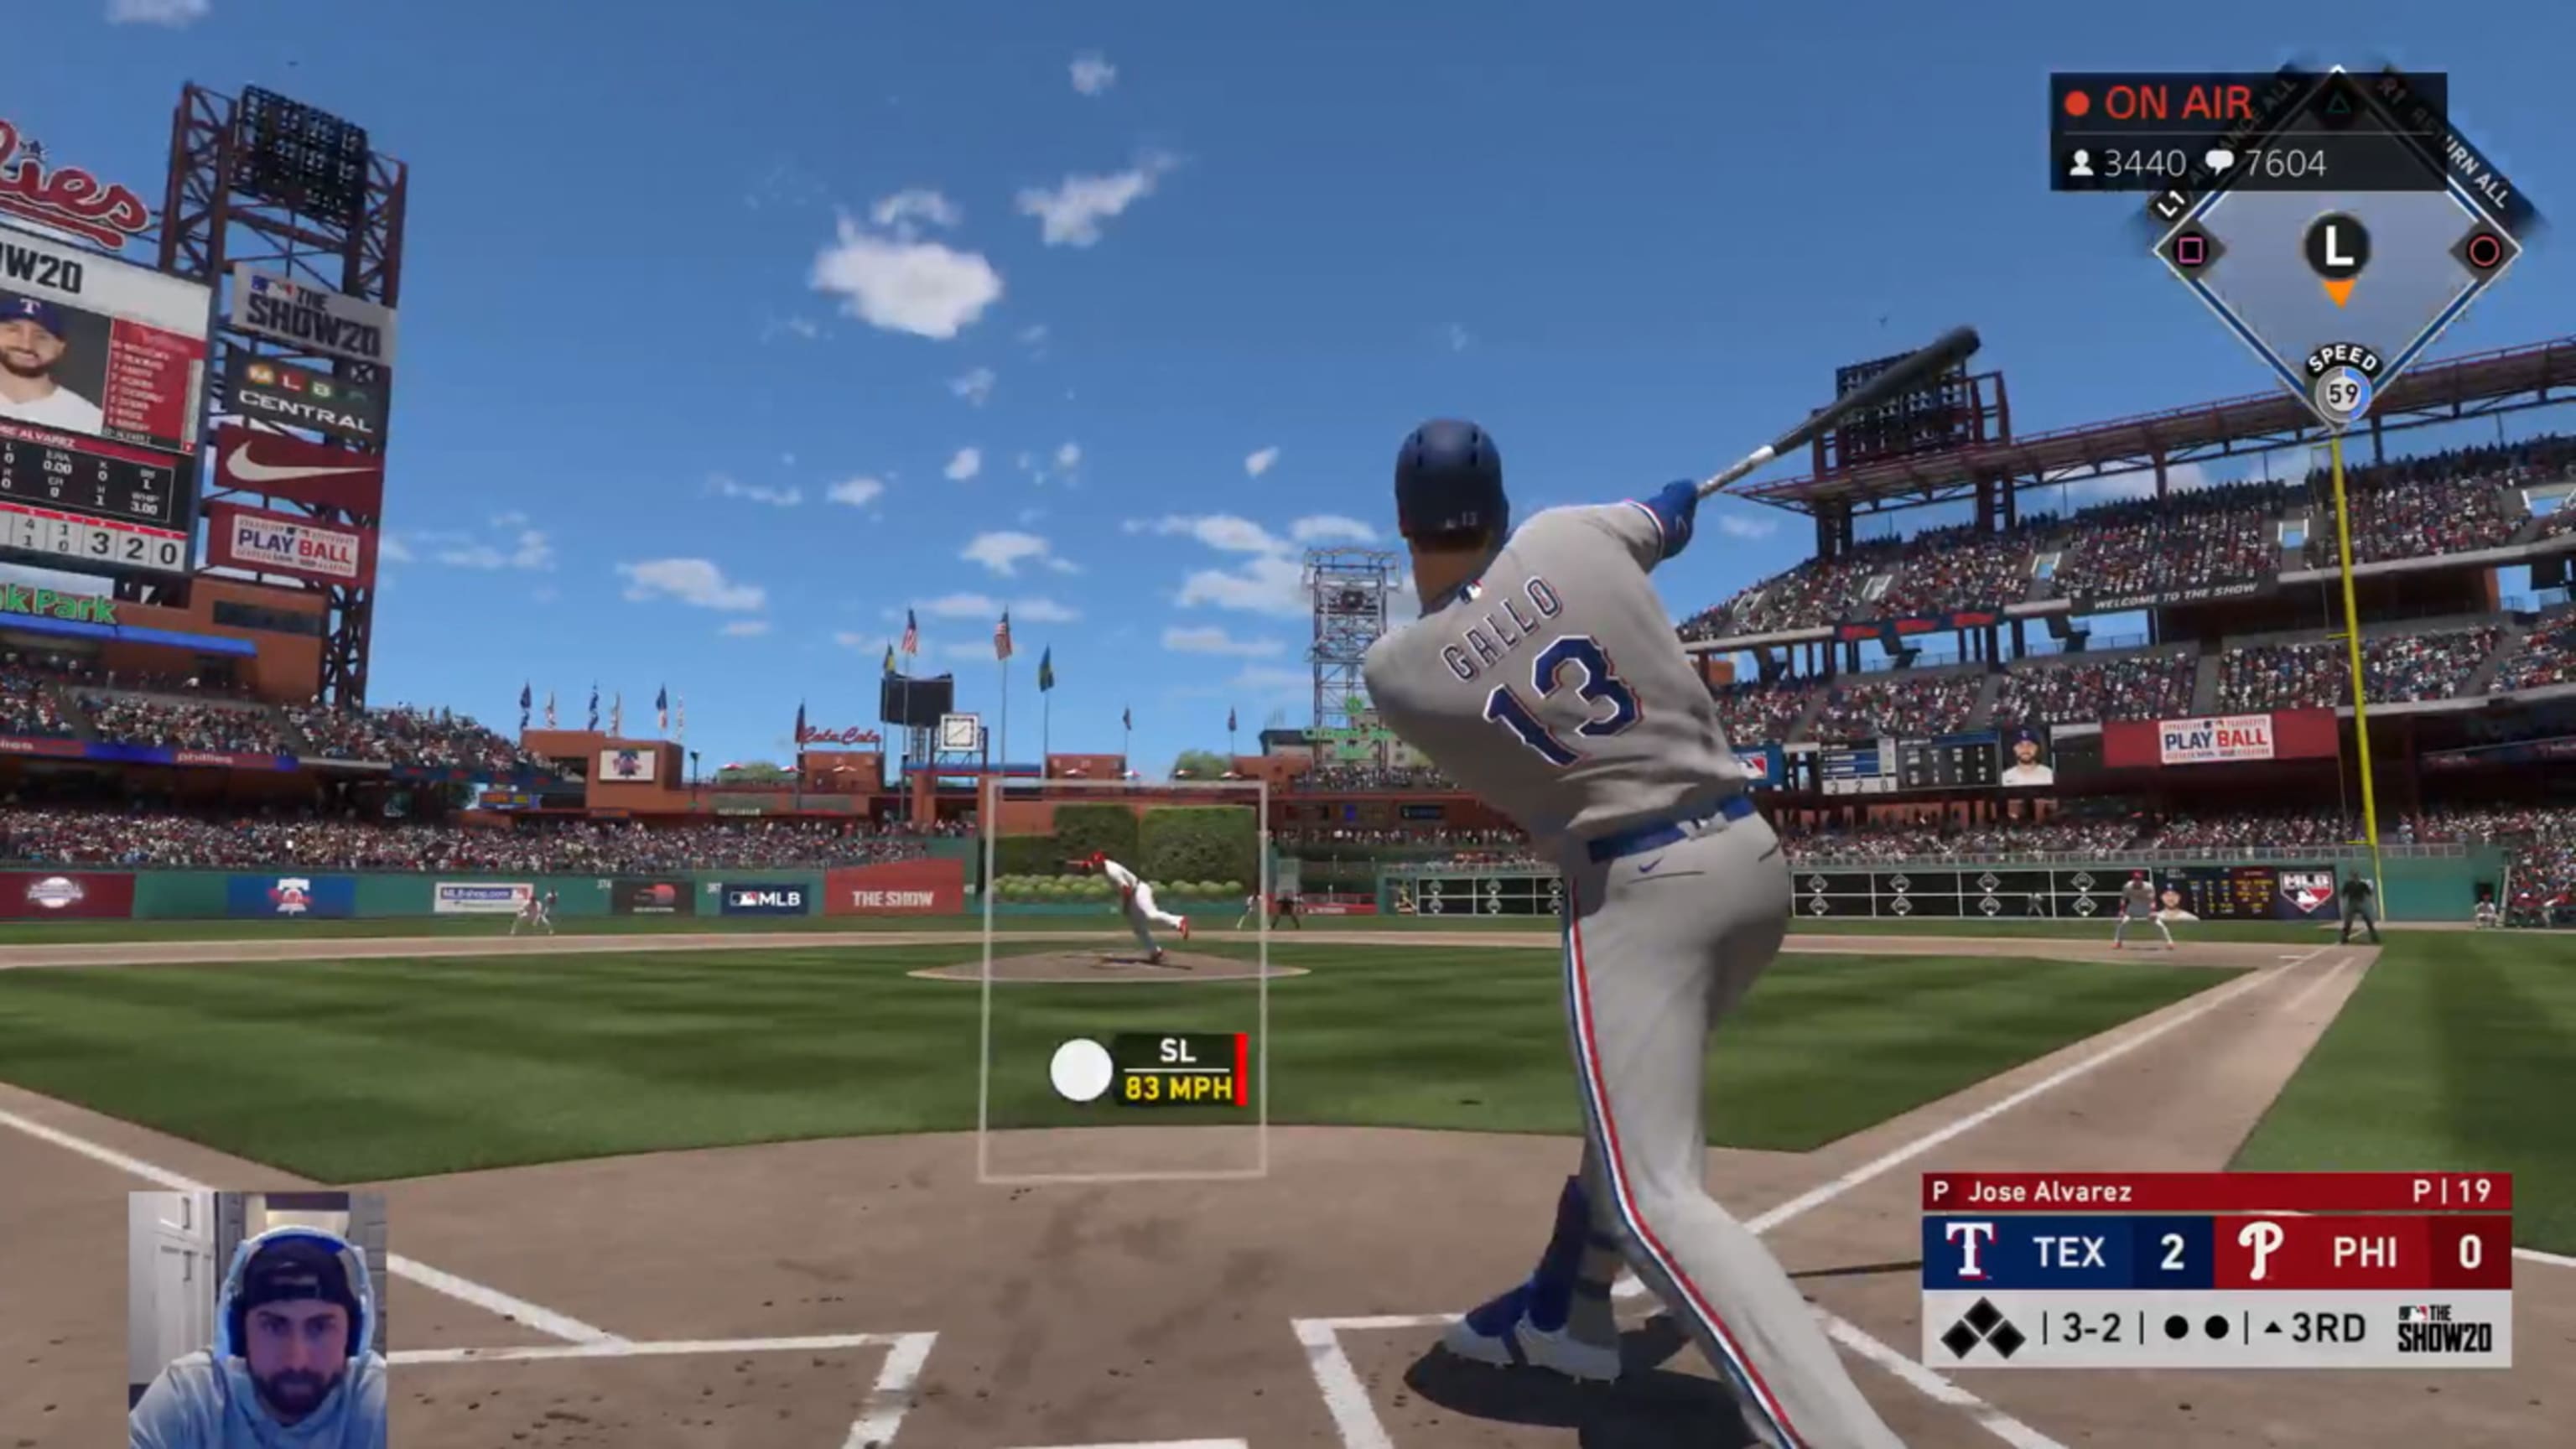 How to watch Joey Gallo via Twitch stream in MLB The Show 20 Players League  - DraftKings Network